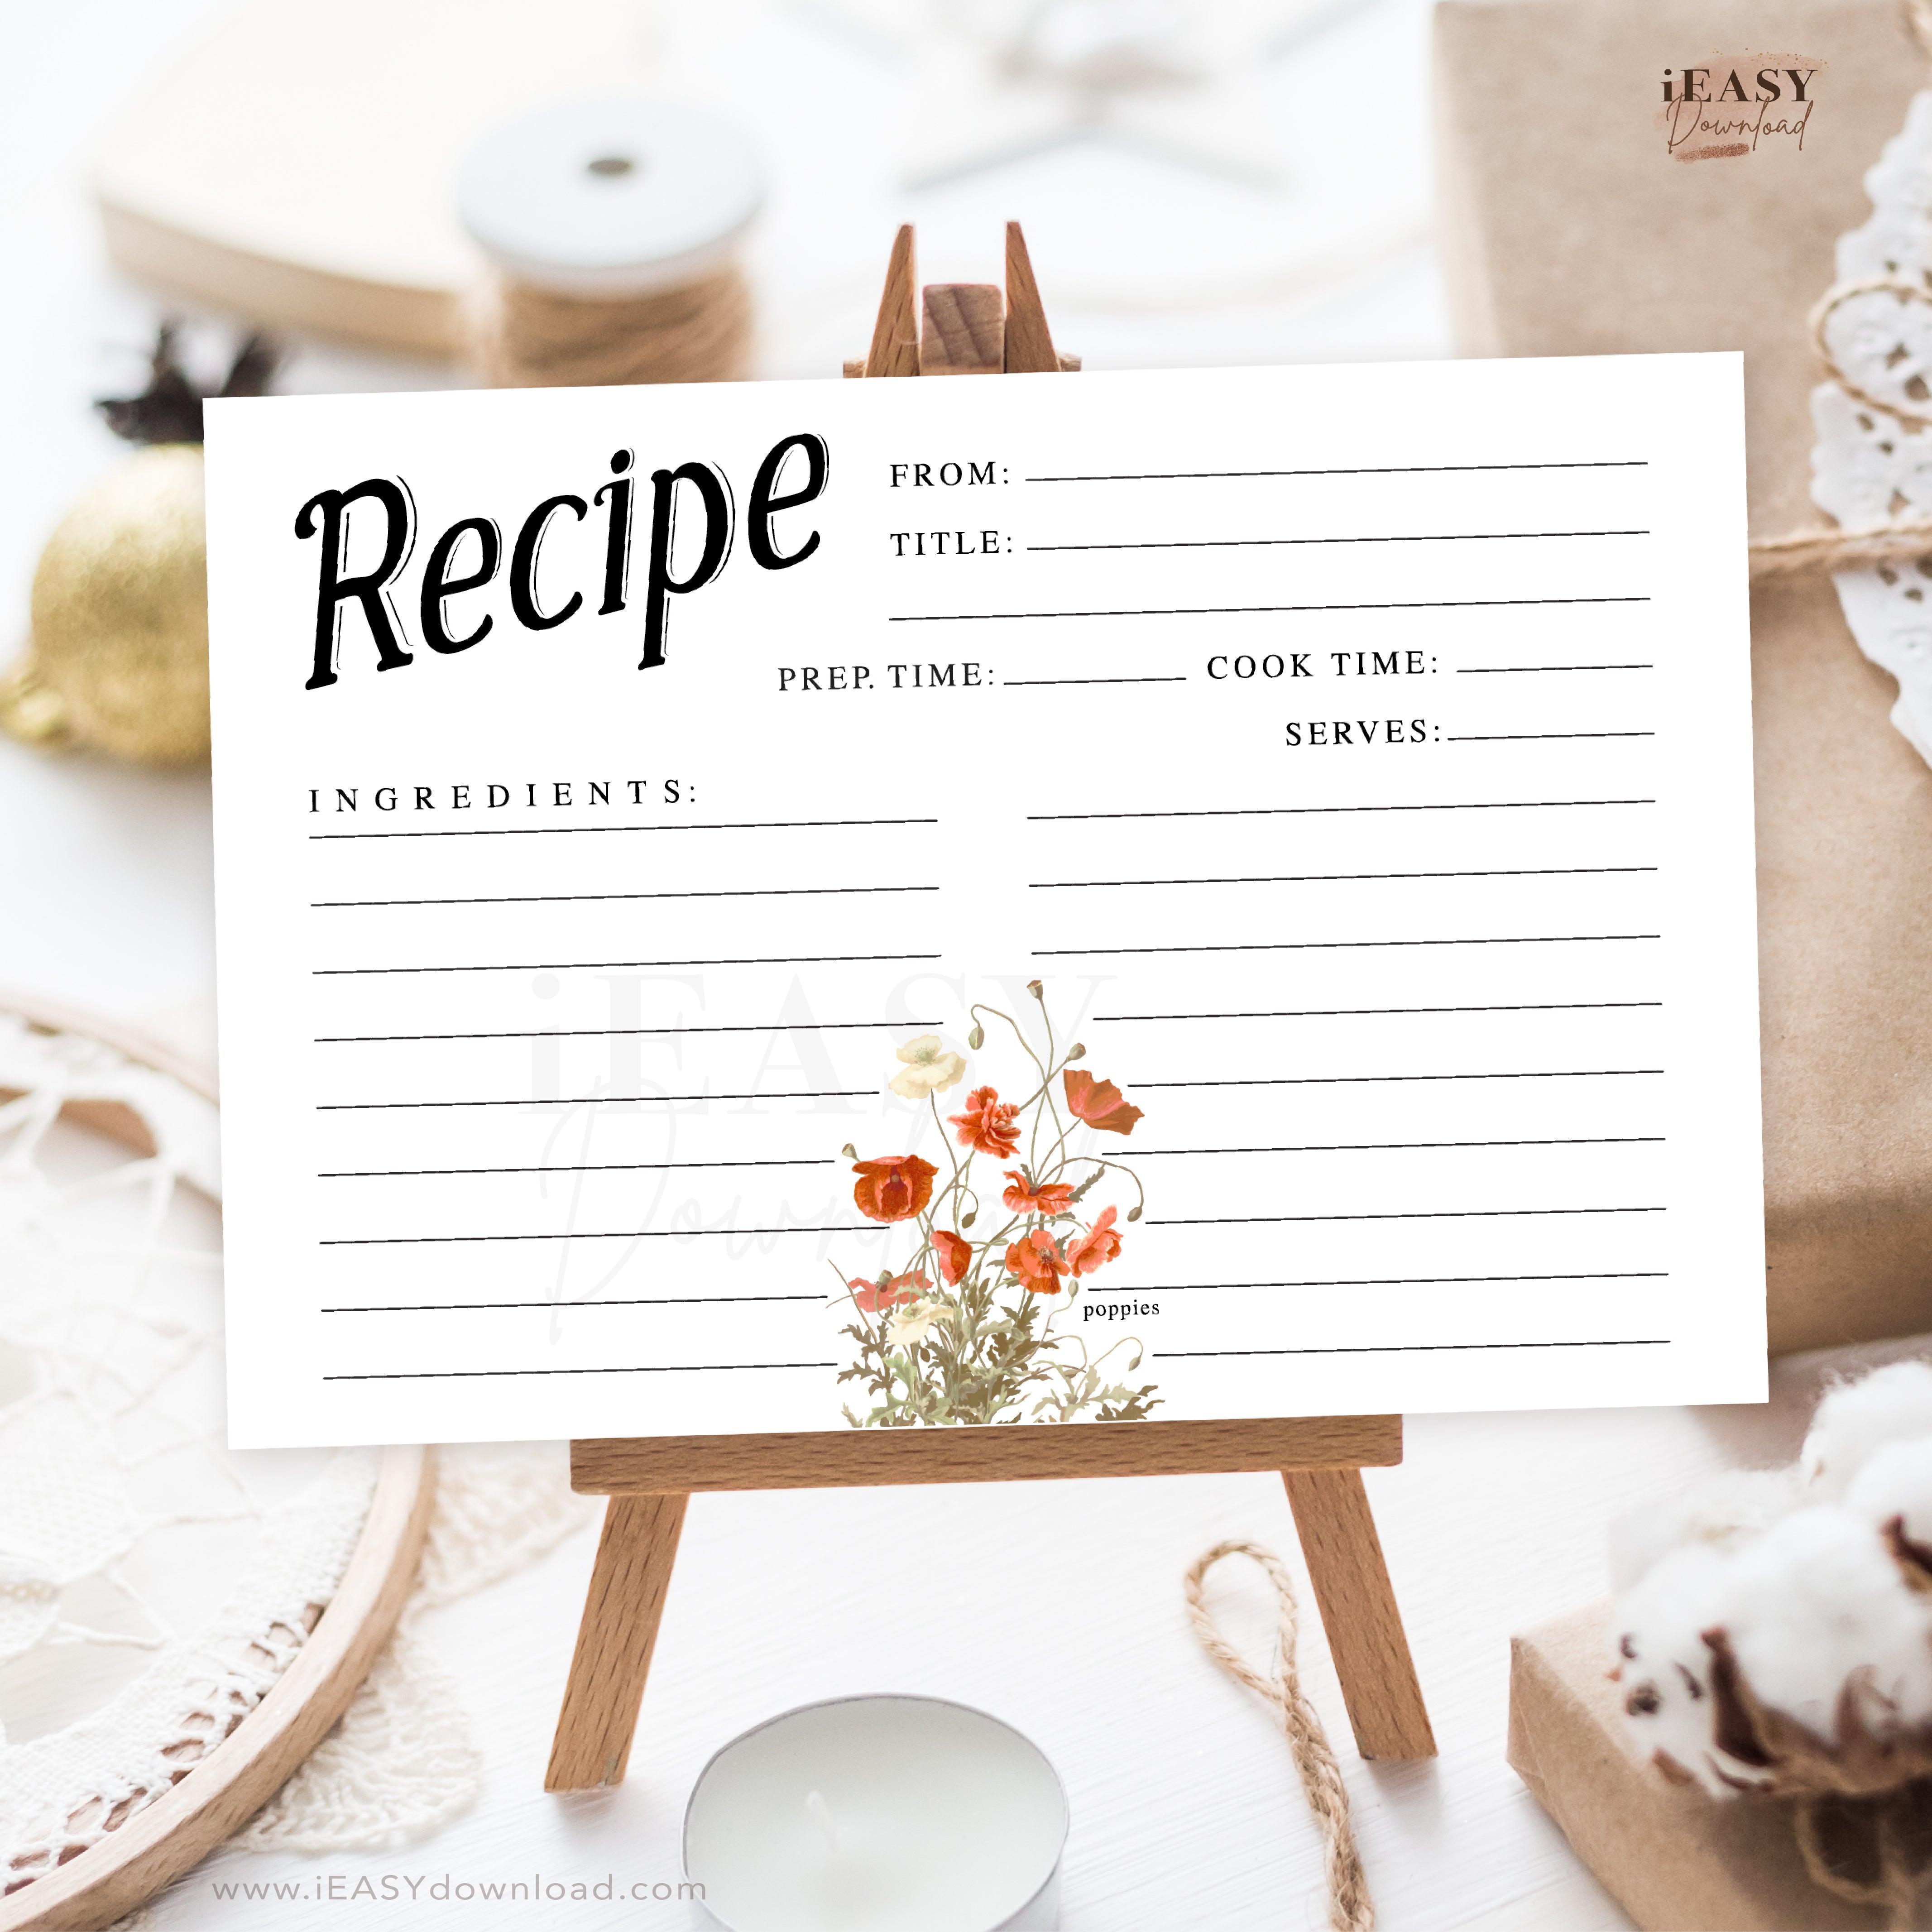 Personalized Recipe Cards - Red & Purple Watercolor Flowers 24 Cards